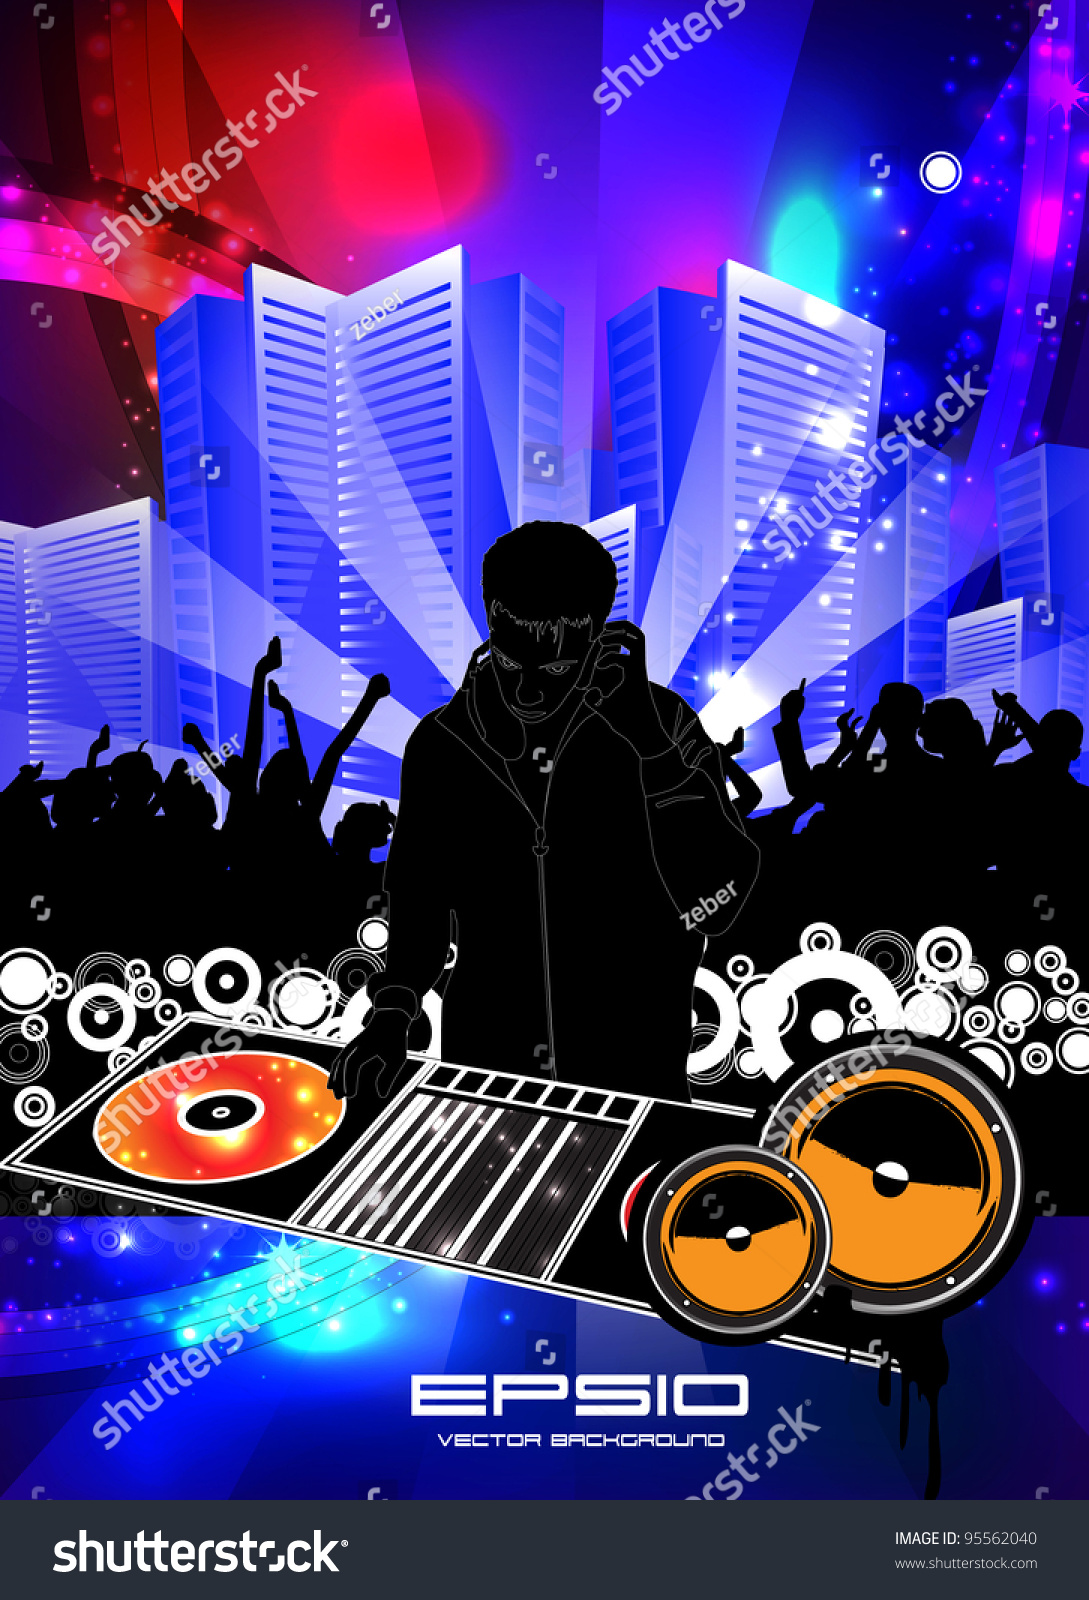 abstract-music-dj-poster-design-template-vector-illustration